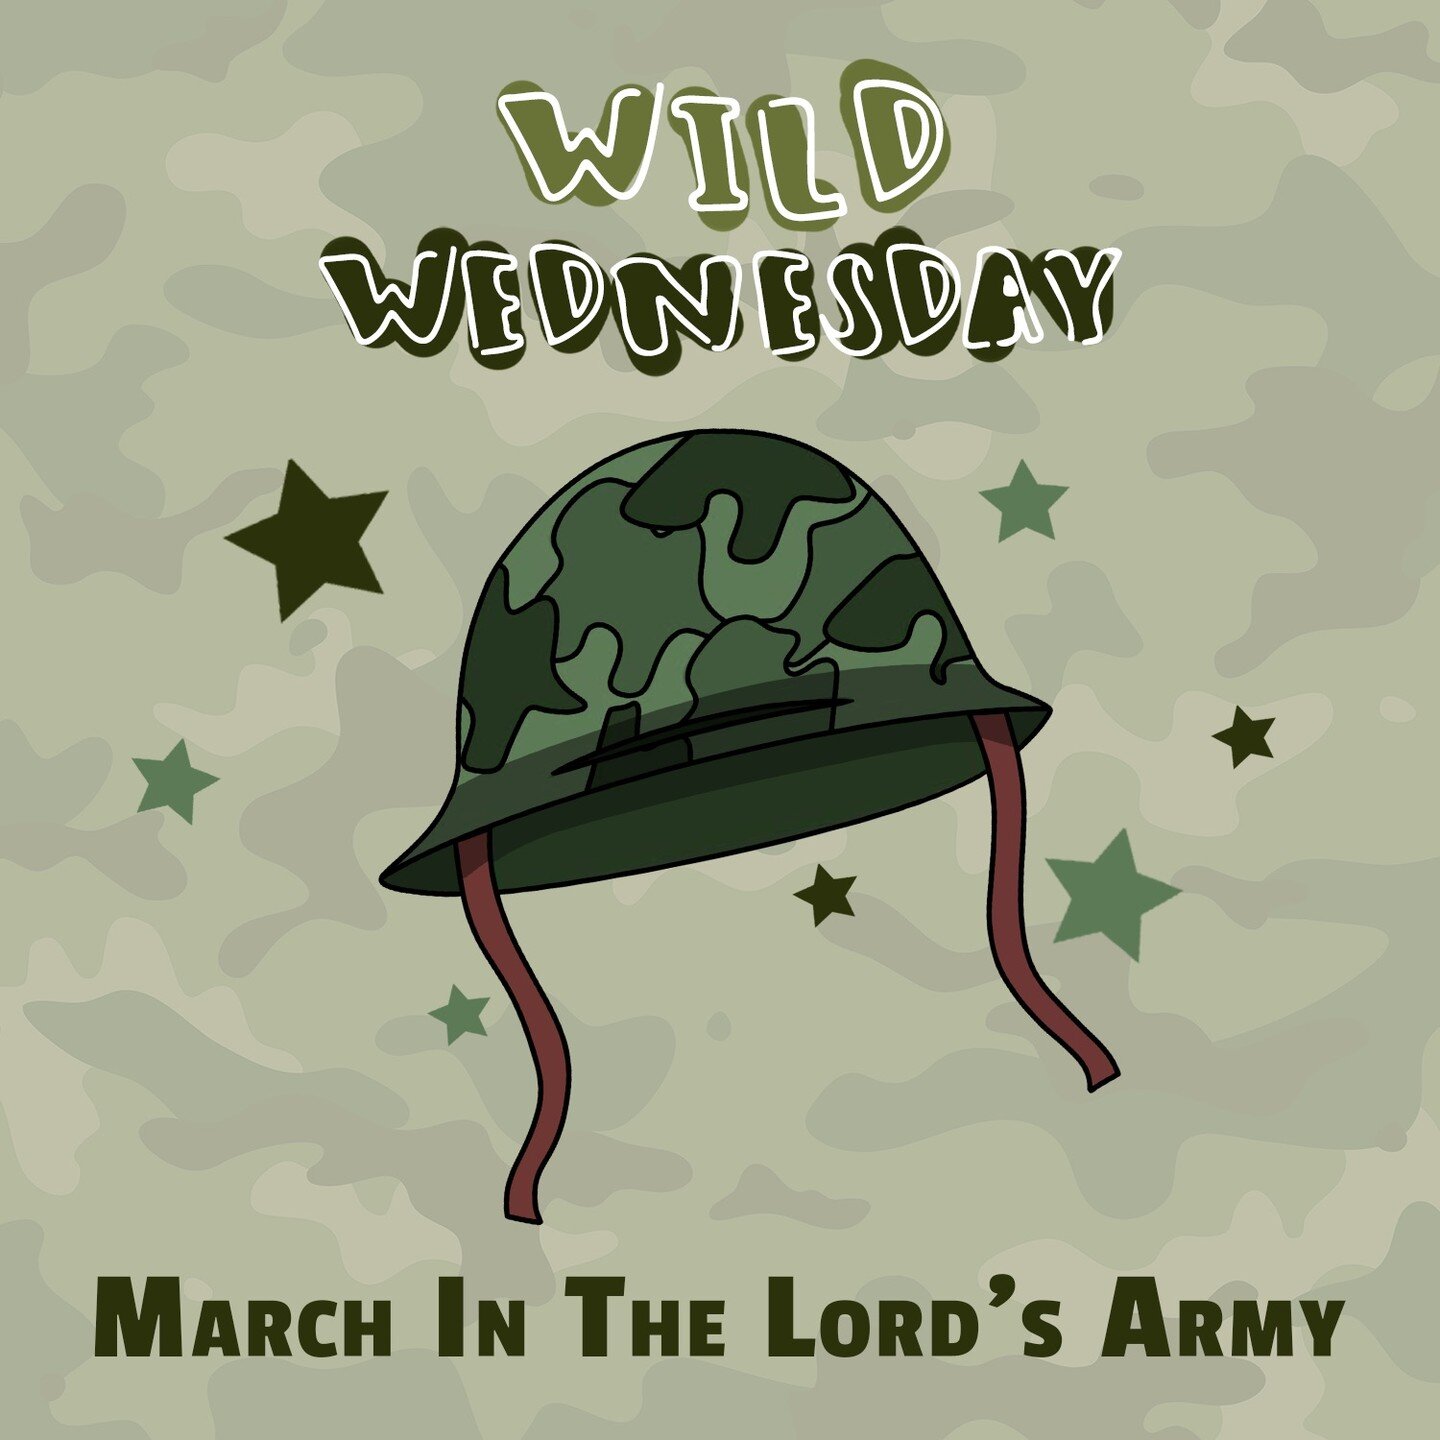 Wednesday, March 27th, is our next Wild Wednesday! We hope your students can join us for this fun-filled night of worship, reading the Word, and dressing up in their best military attire as members of the Lord's Army!